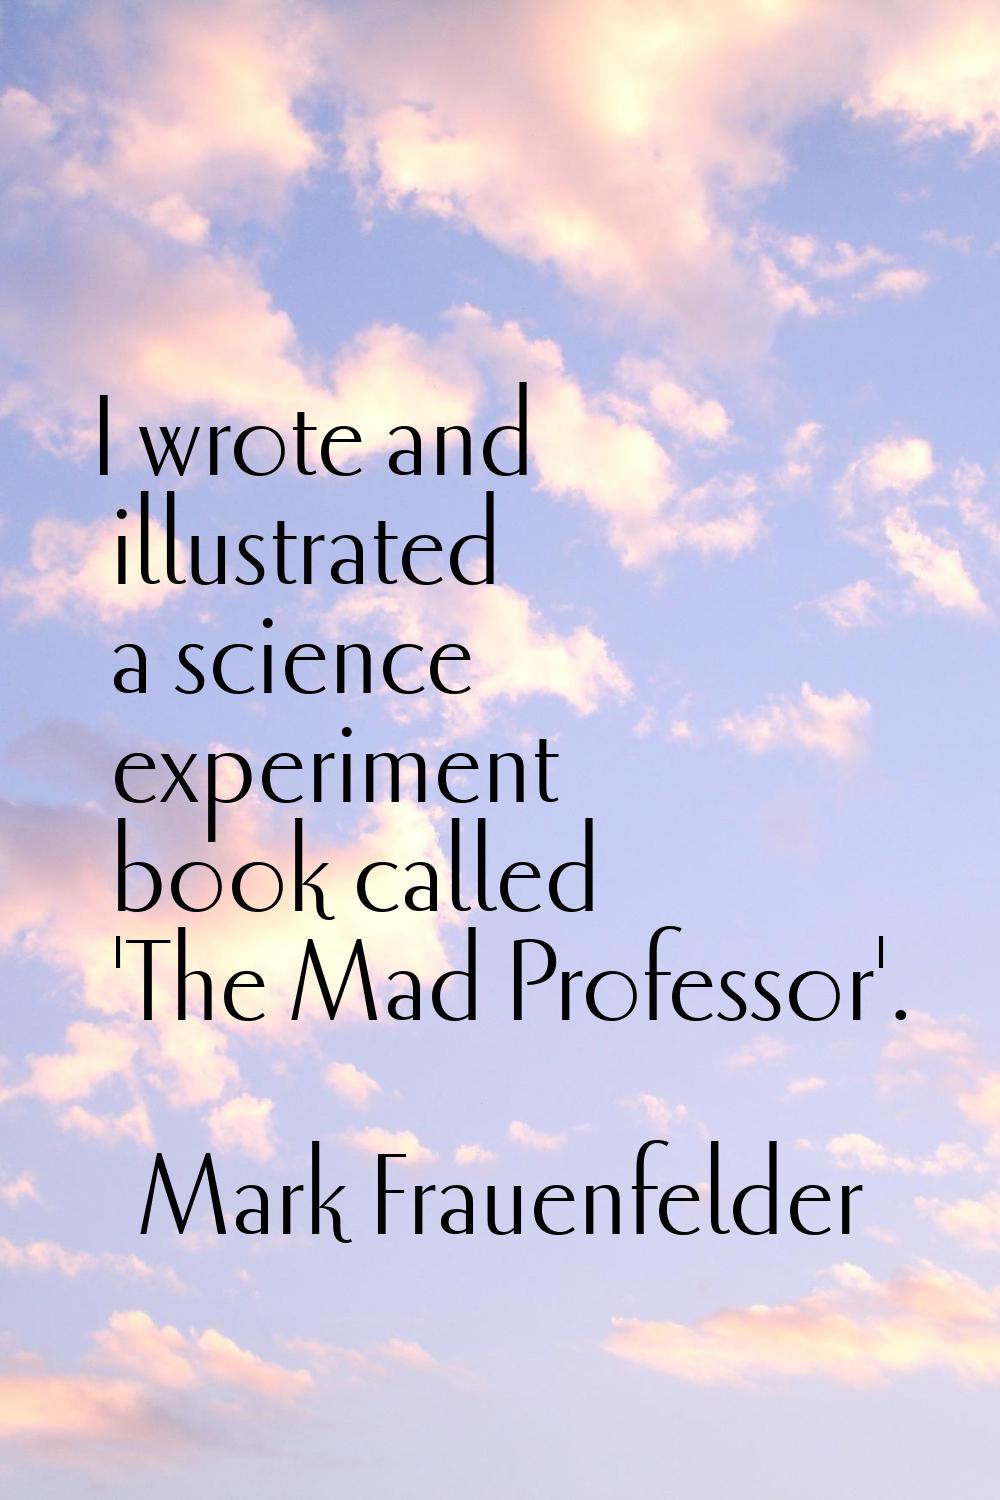 I wrote and illustrated a science experiment book called 'The Mad Professor'.